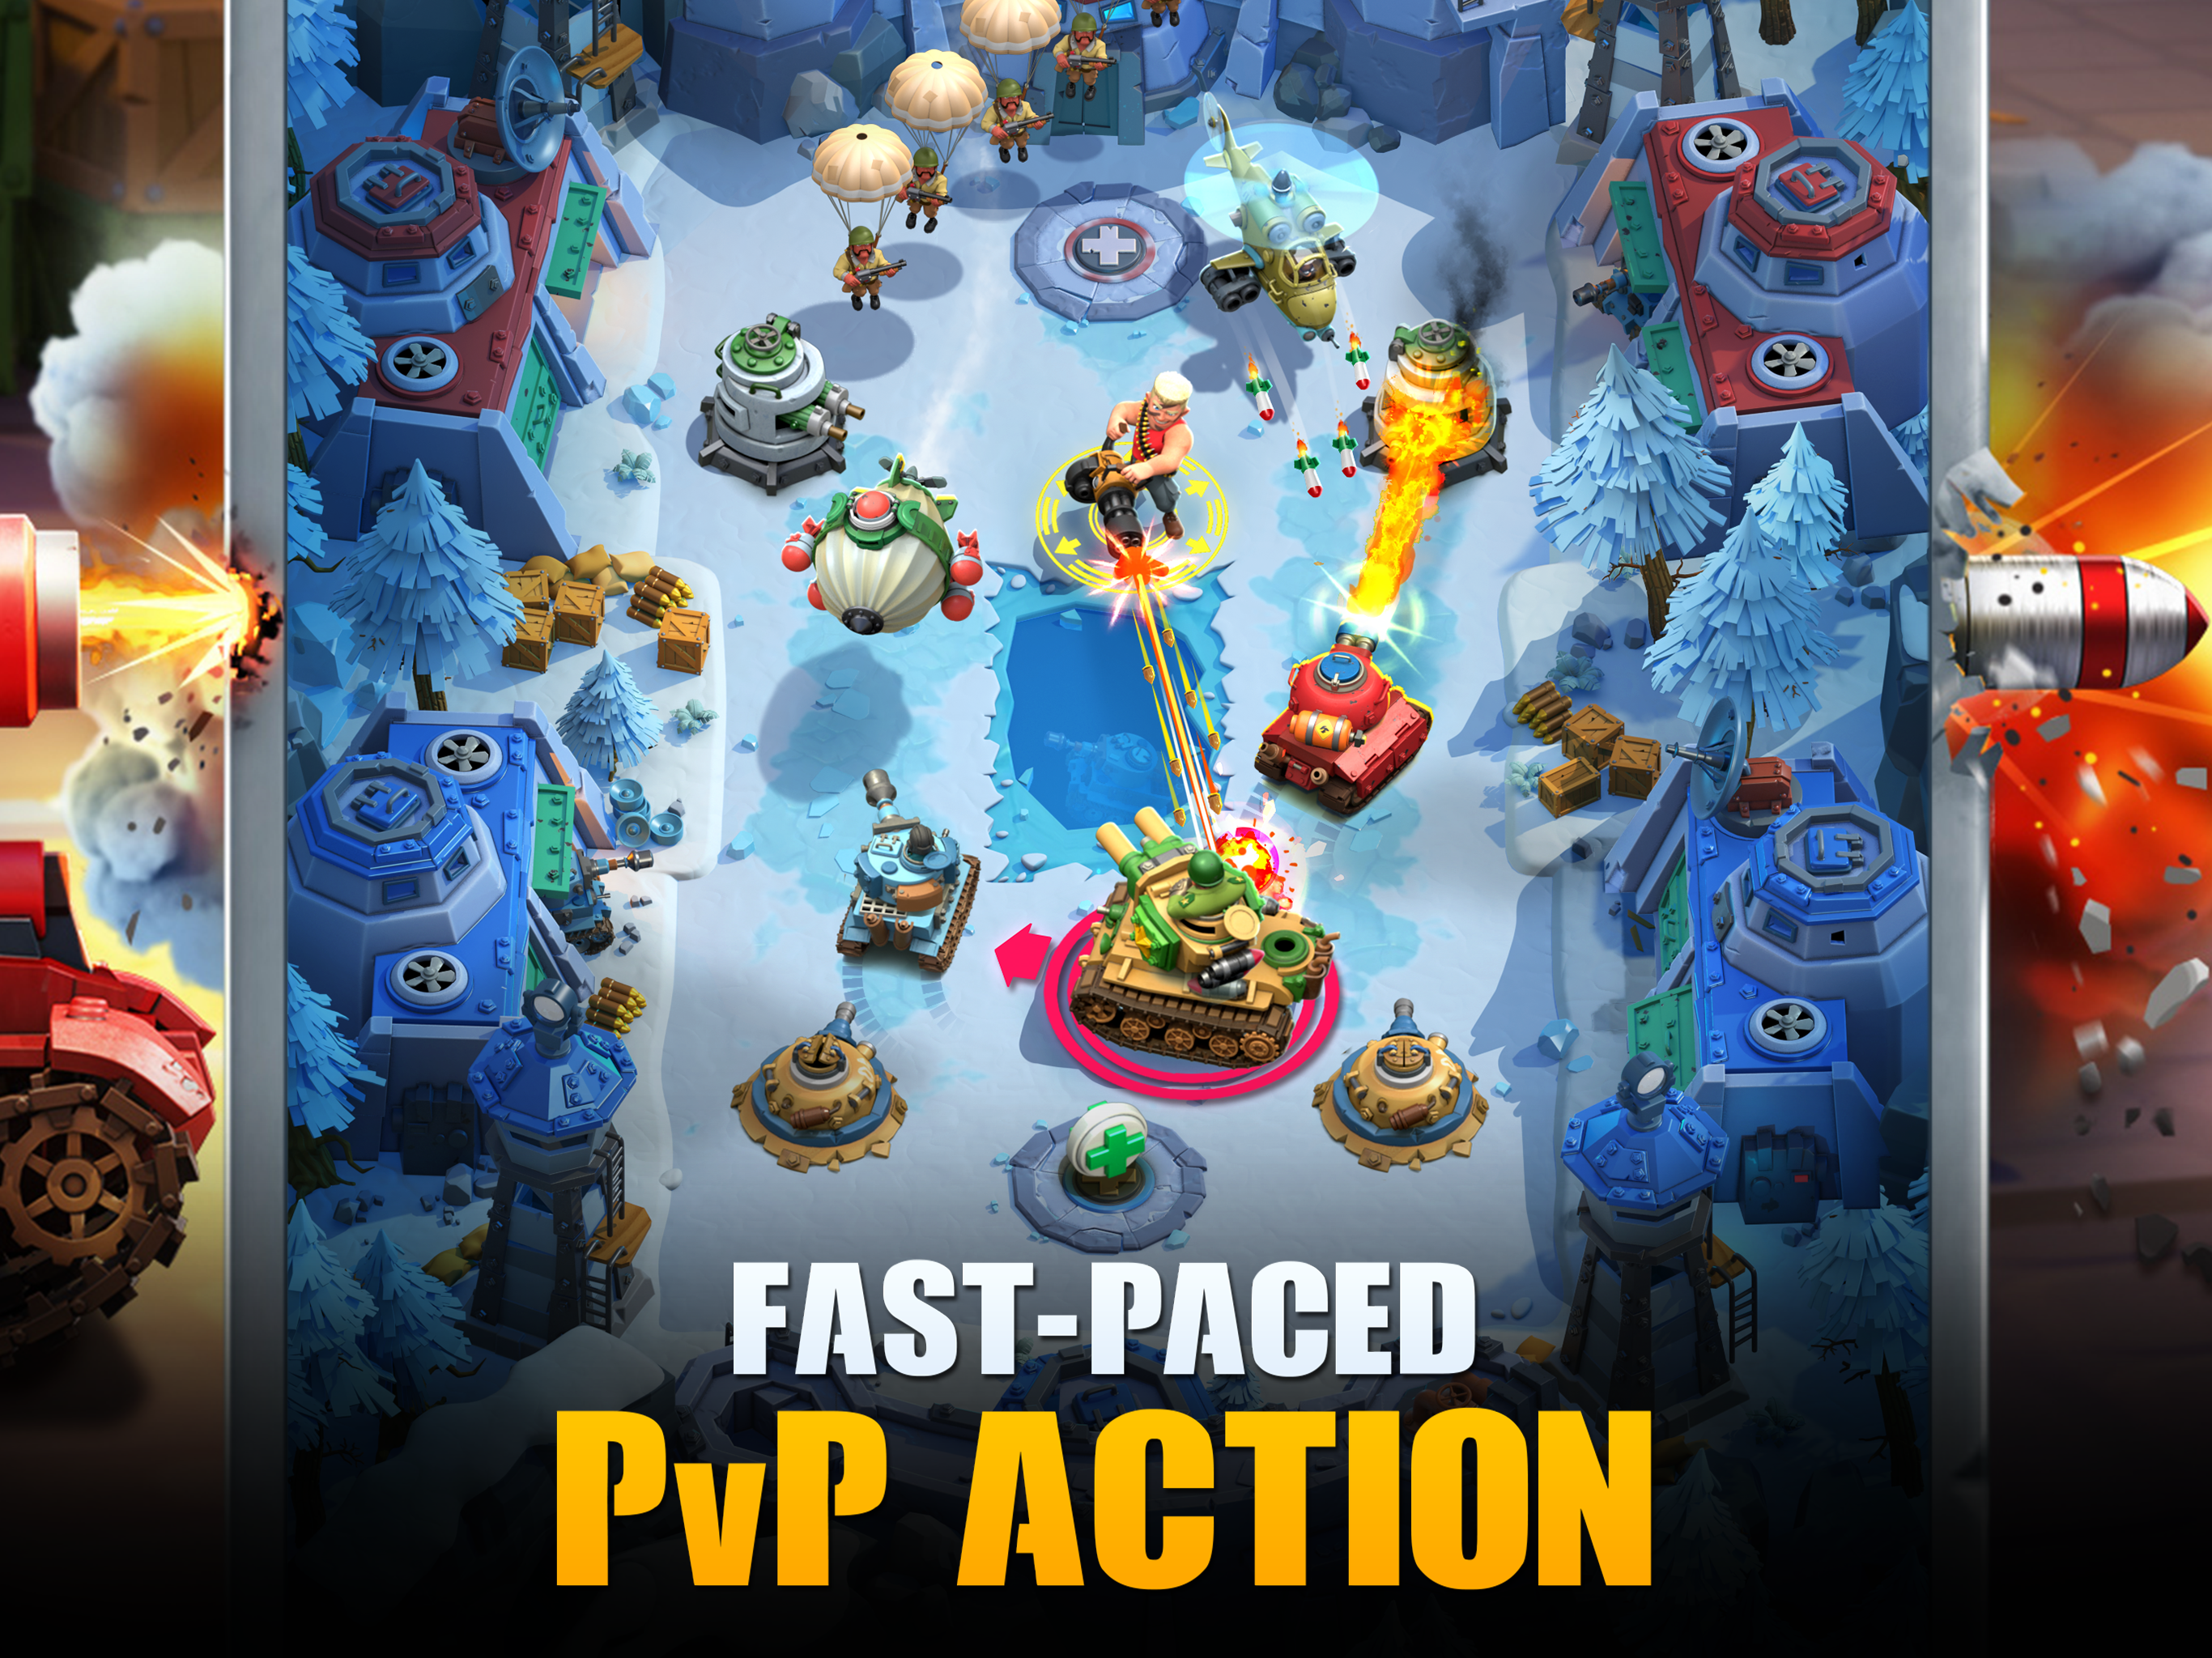 War Alliance - PvP Royale android iOS apk download for free-TapTap